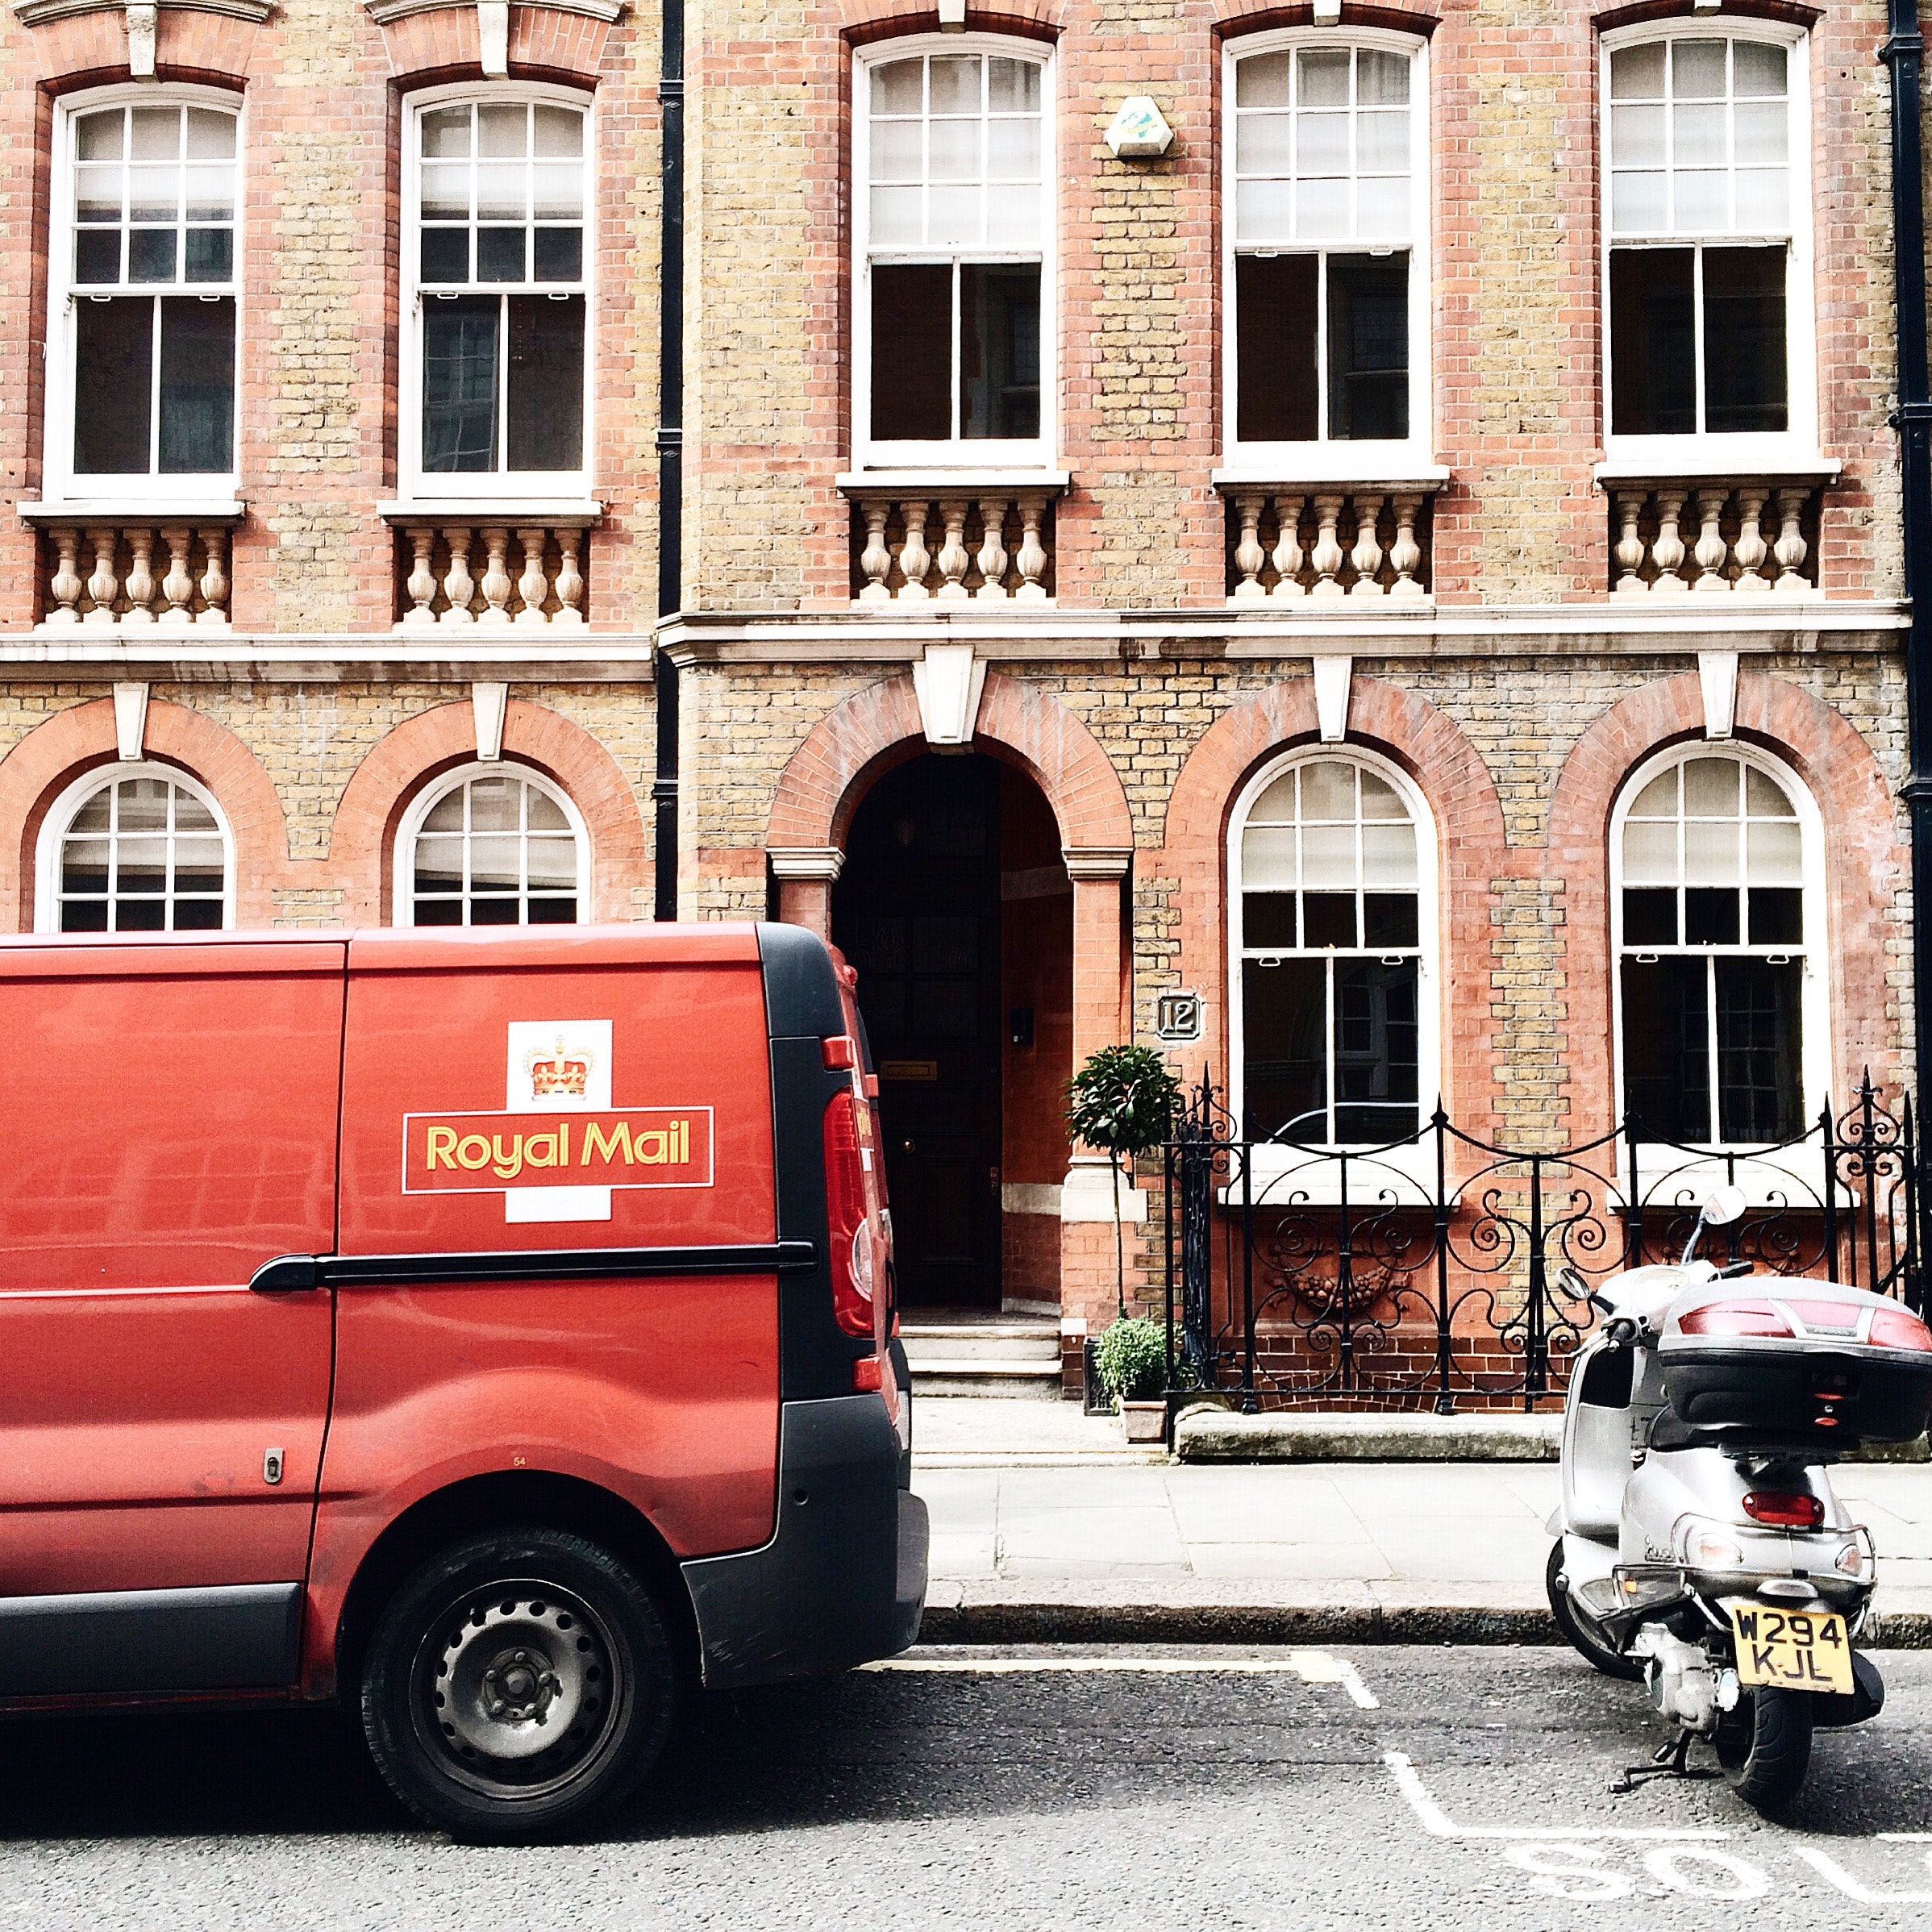 Red royal mail parked near brown brick building photo